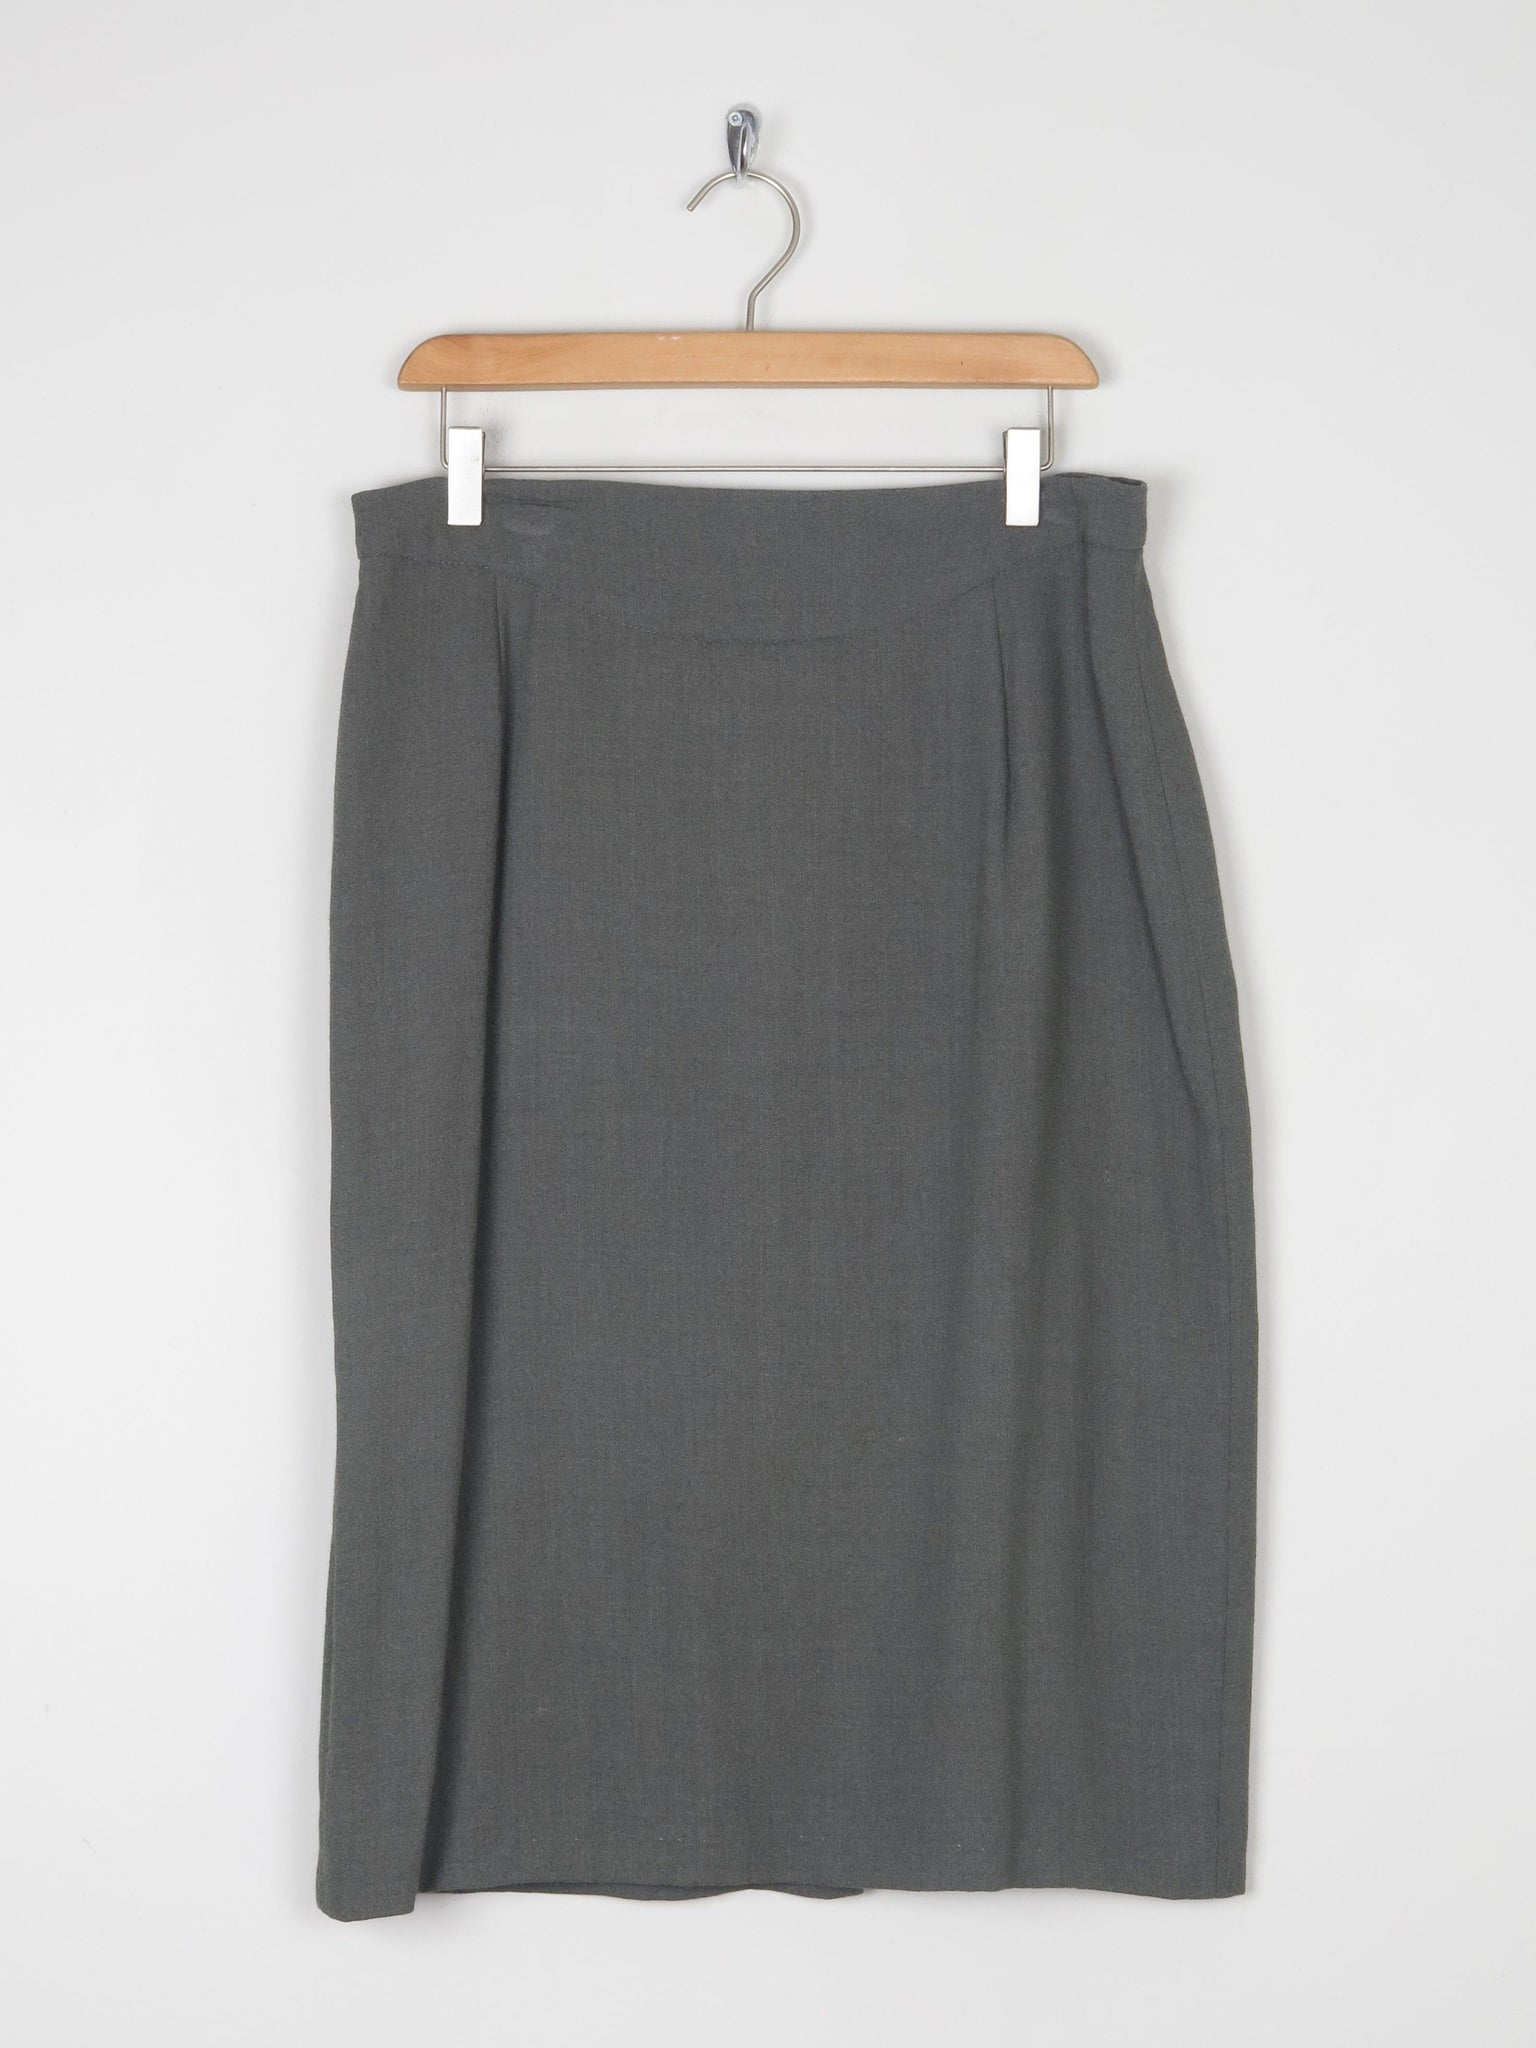 Green Vintage Jacques Vert Wool Pencil Skirt 12/14 - The Harlequin